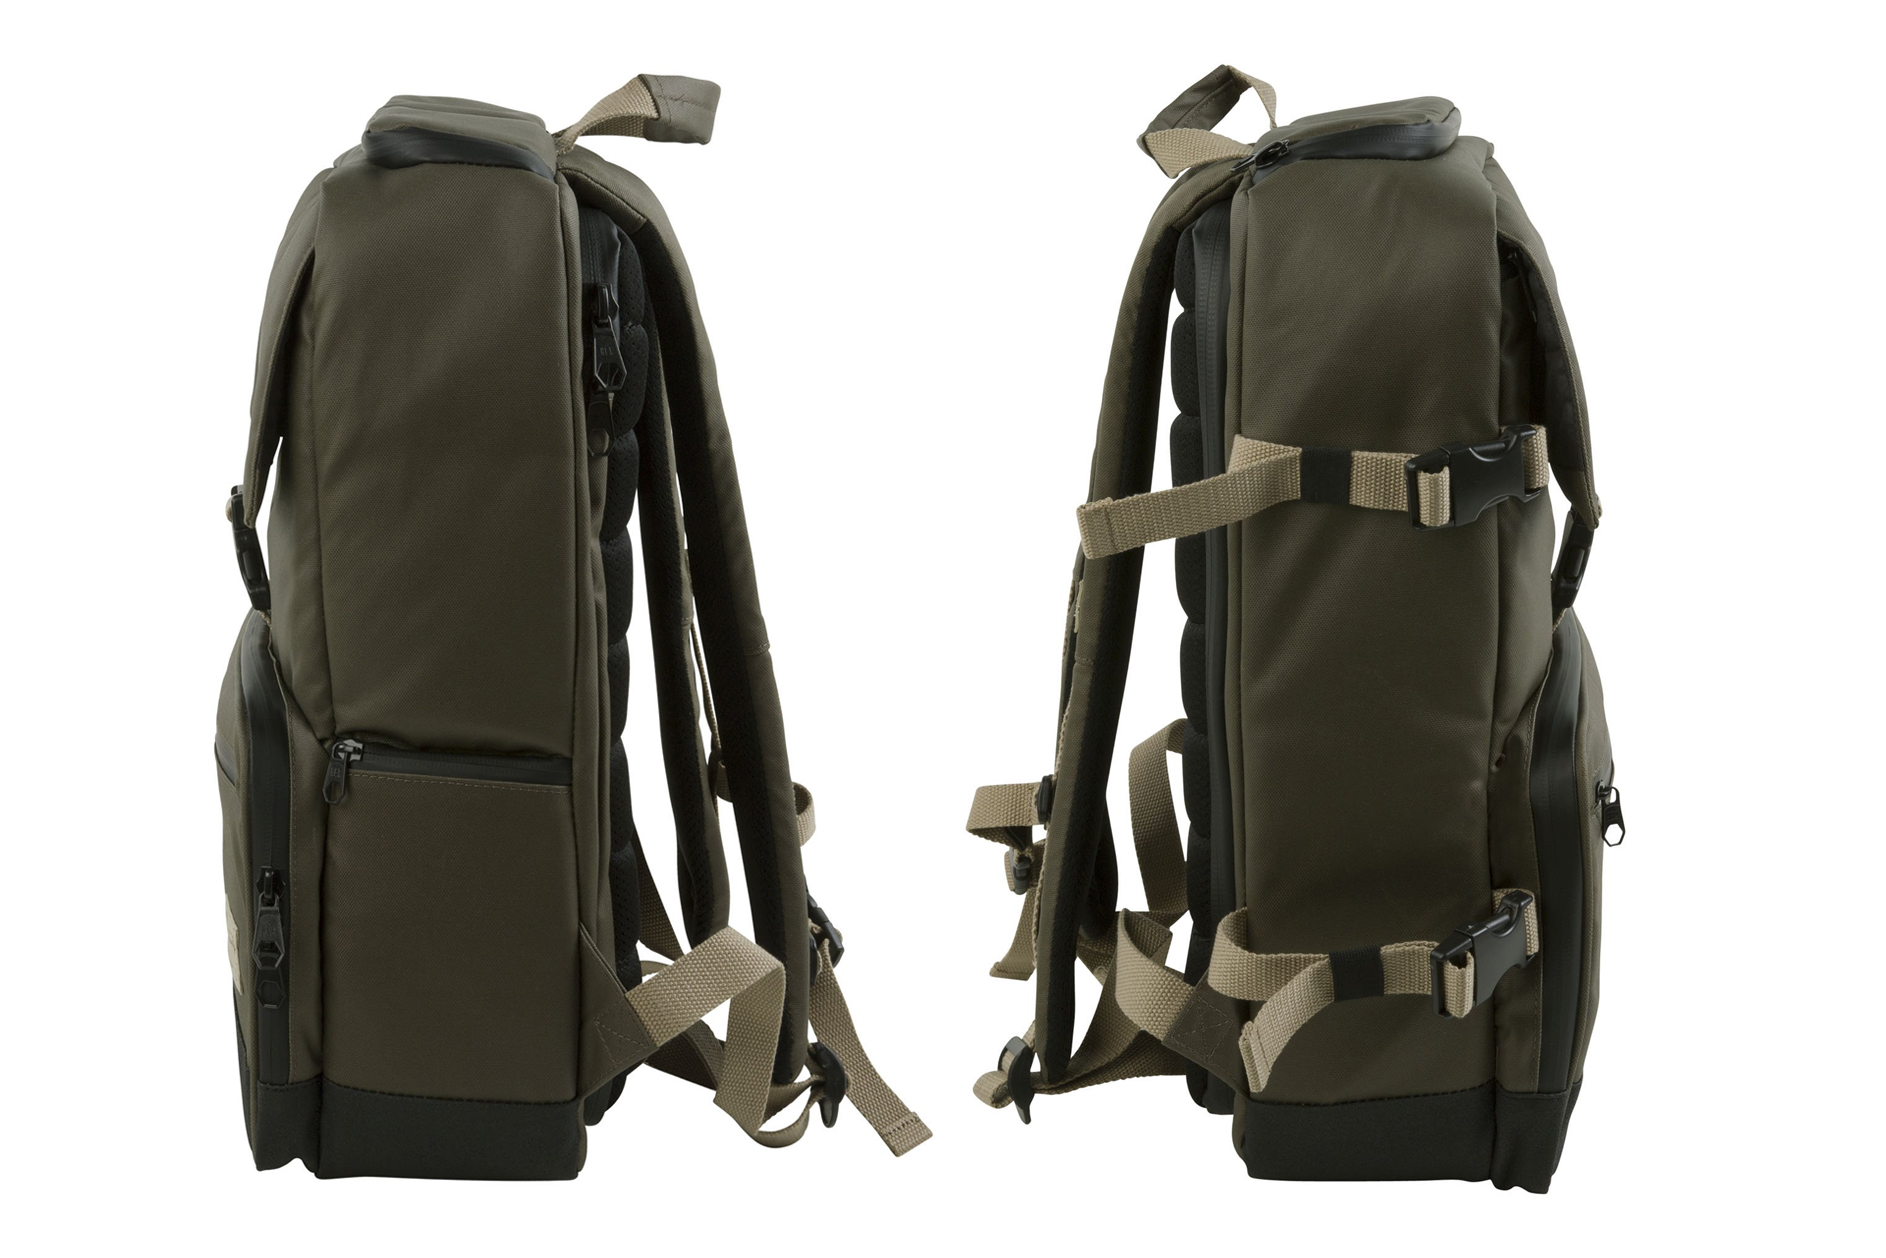 HEX Launches Spring Collection with New DSLR Backpacks